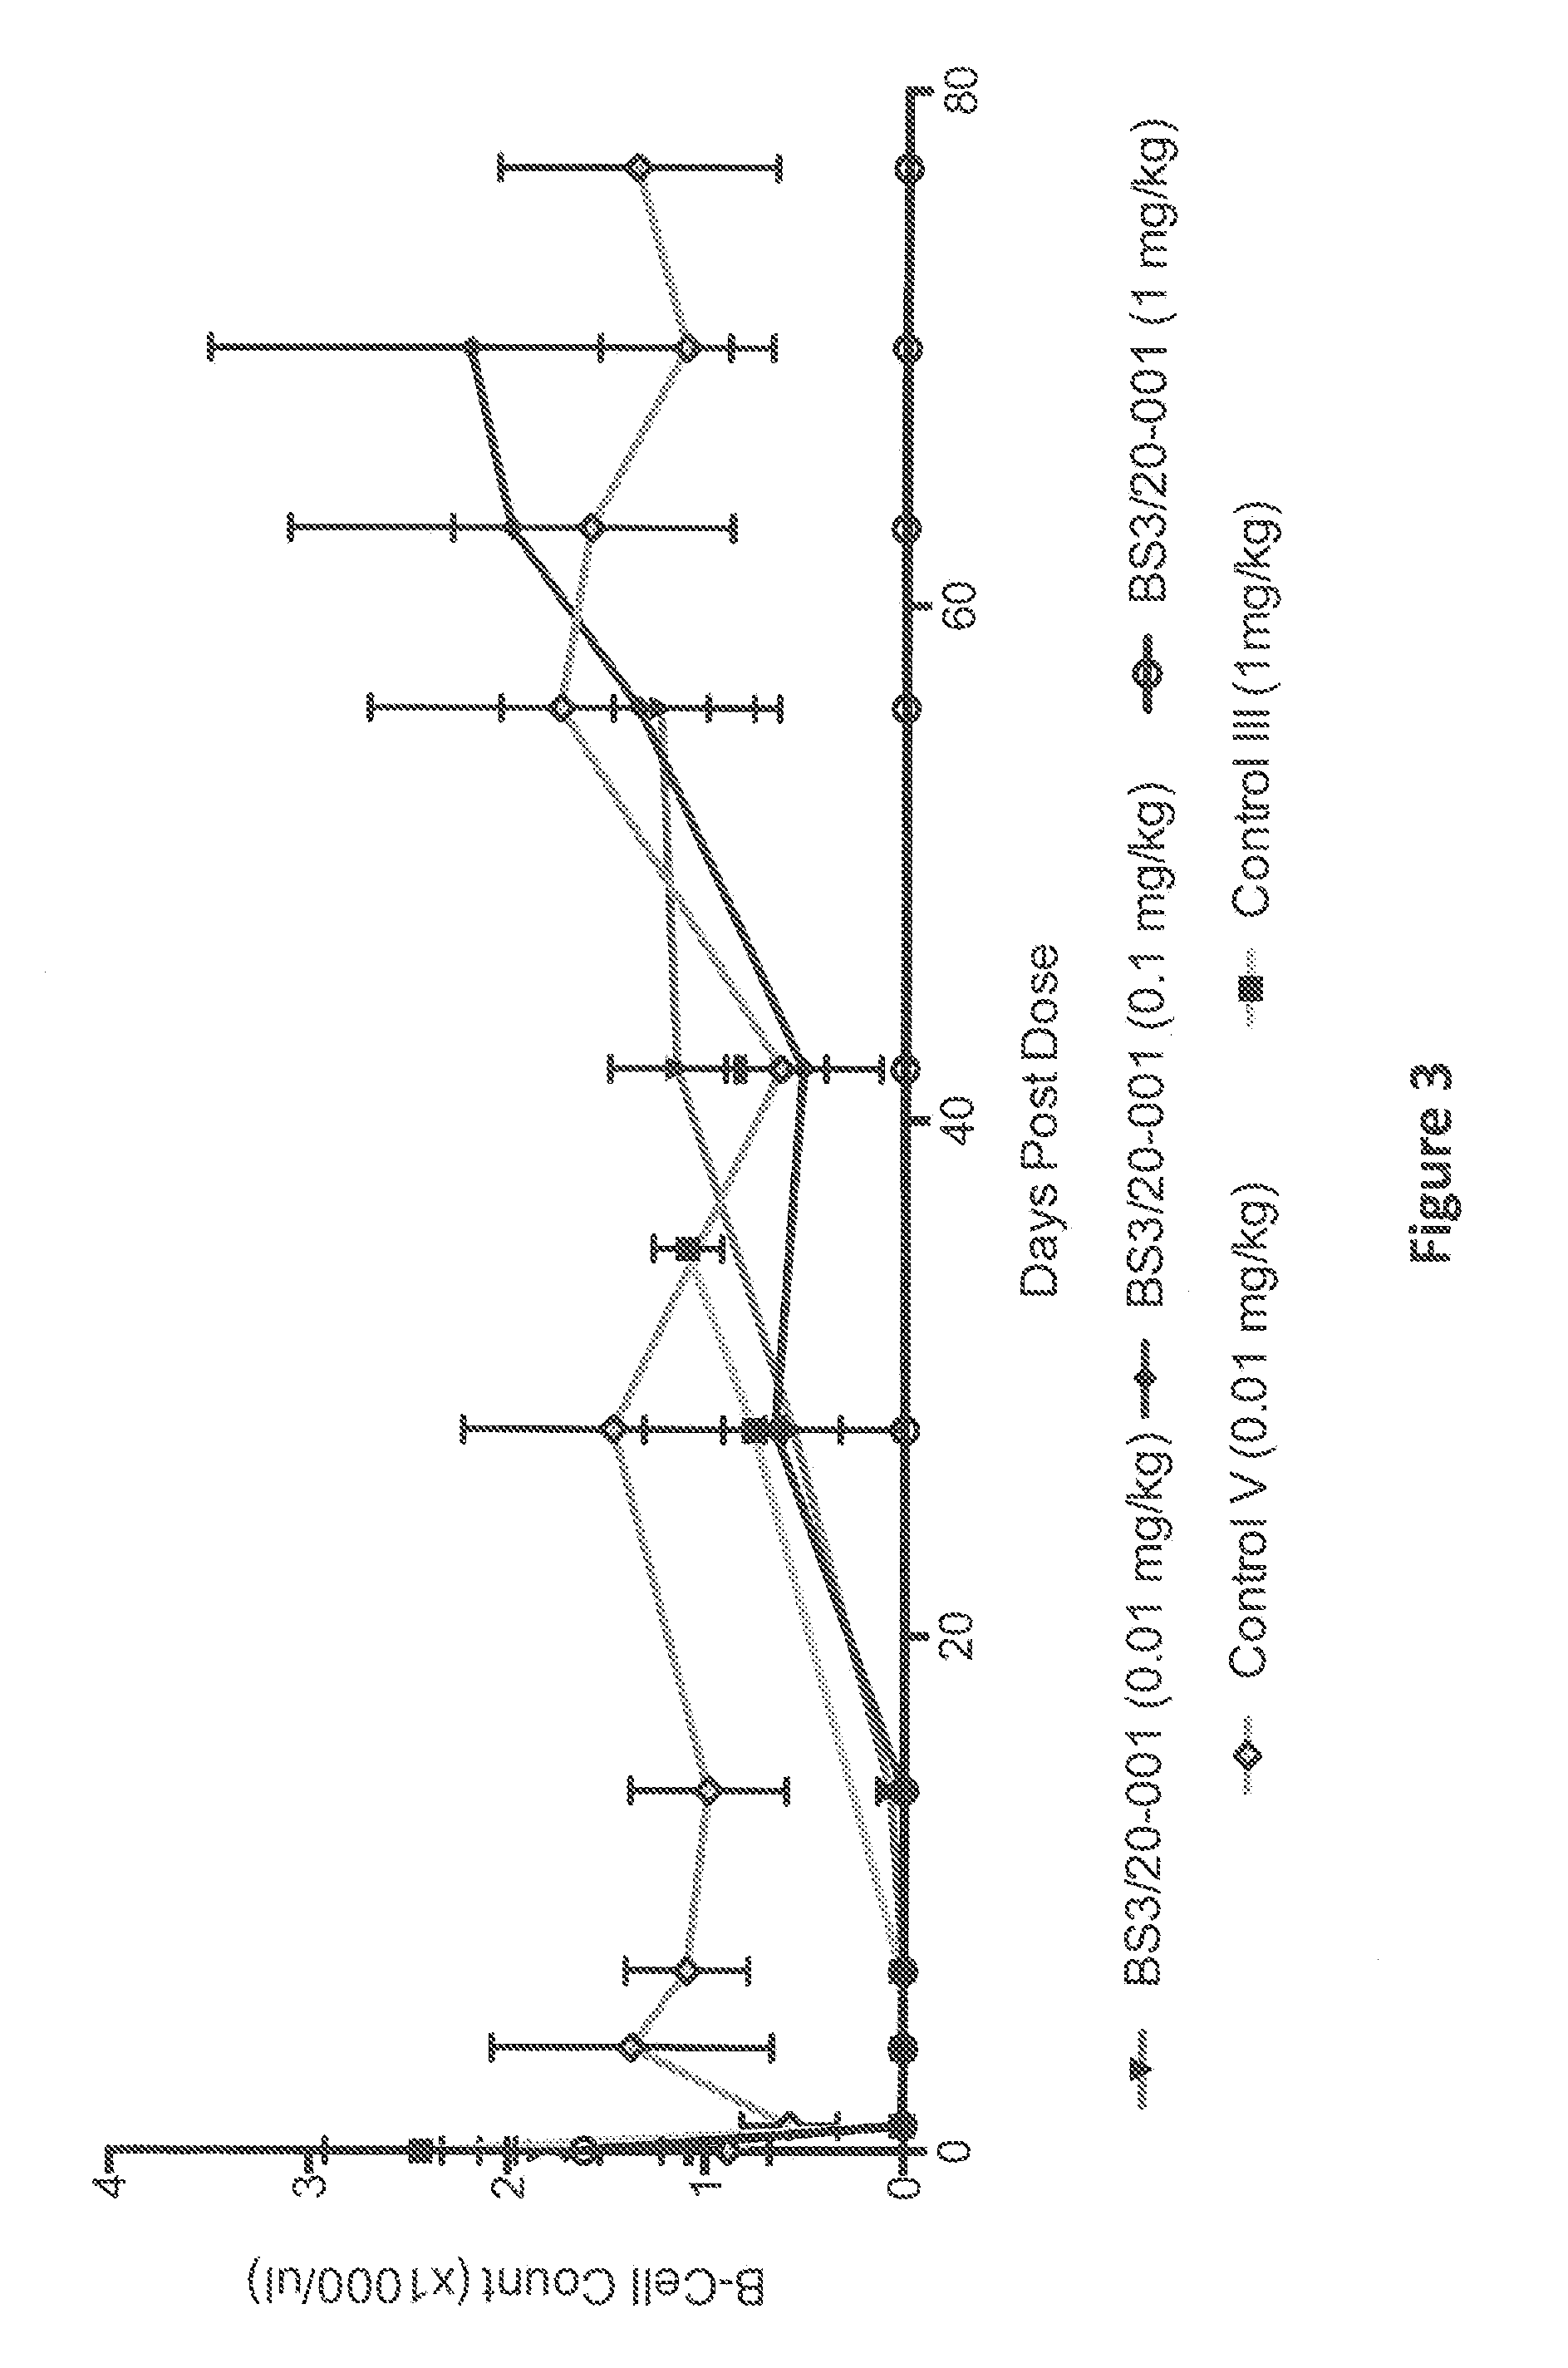 Anti-cd3 antibodies, bispecific antigen-binding molecules that bind cd3 and cd20, and uses thereof